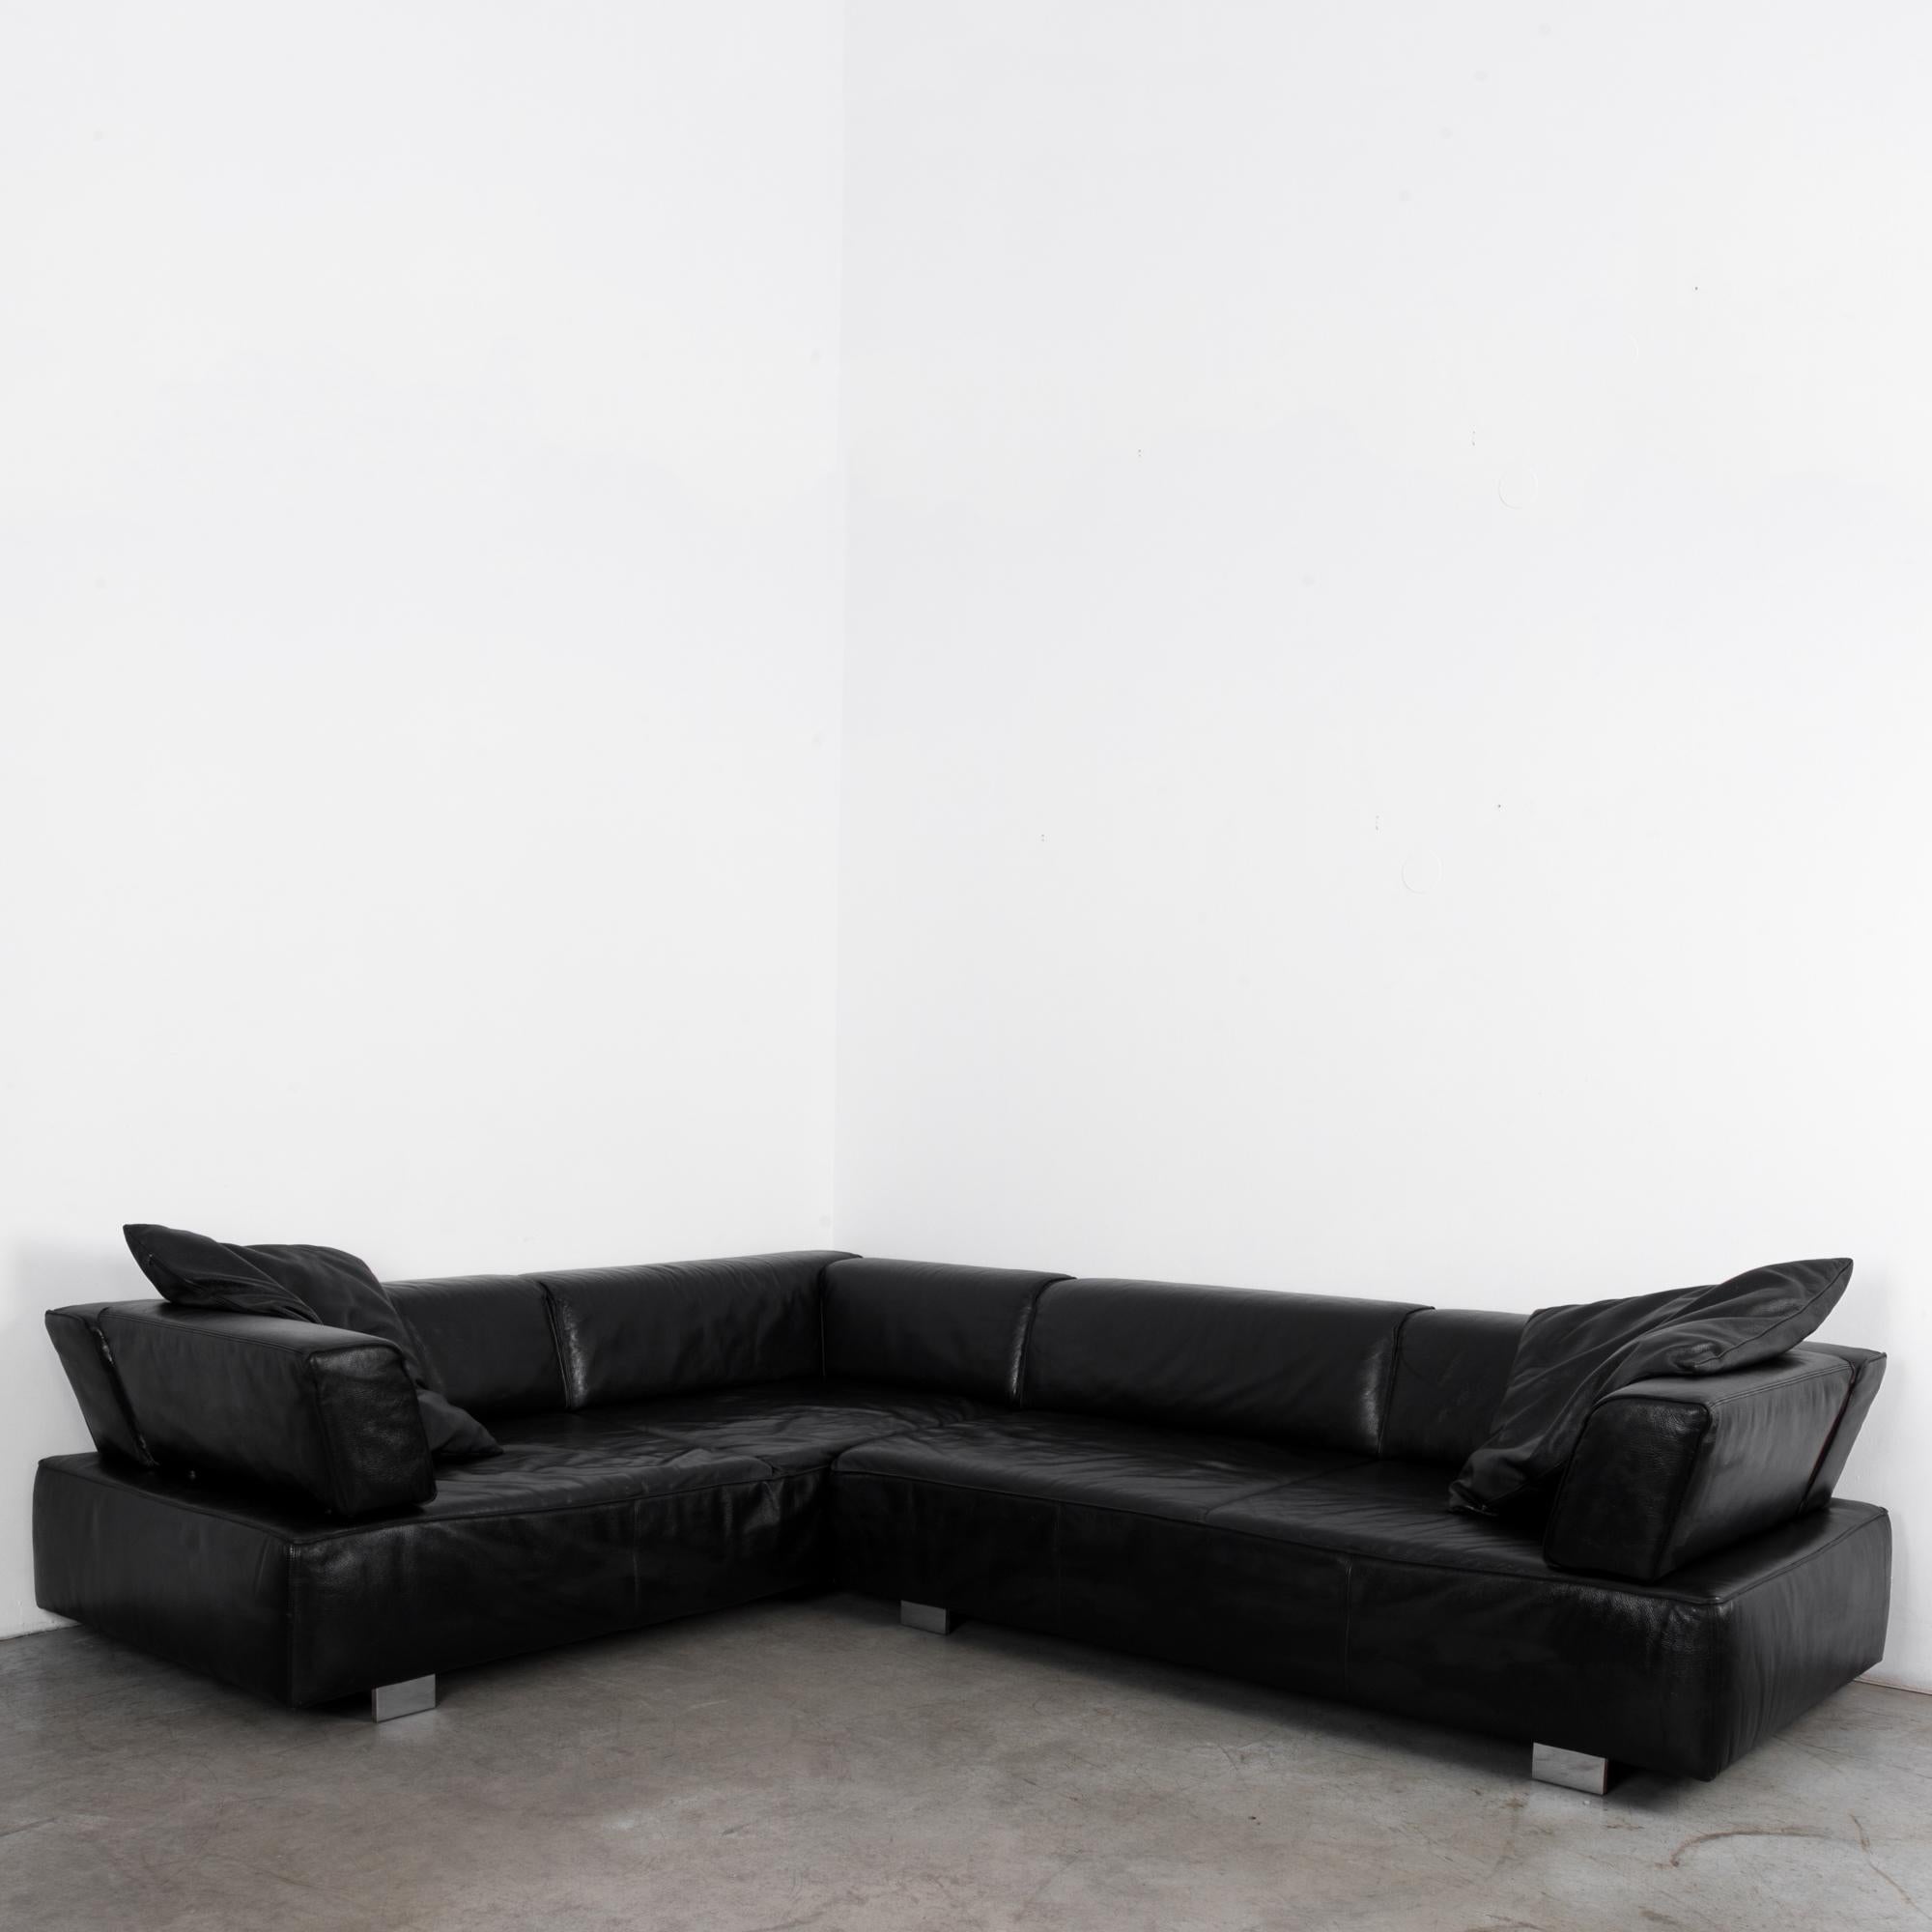 A black leather corner sofa from Germany, by furniture designers Brühl & Sippold. The bed of the sofa is ample, raised upon silver feet. The backrests, which sit at a reclined slant, lend the box-like shape a stylish angularity. The leather is a